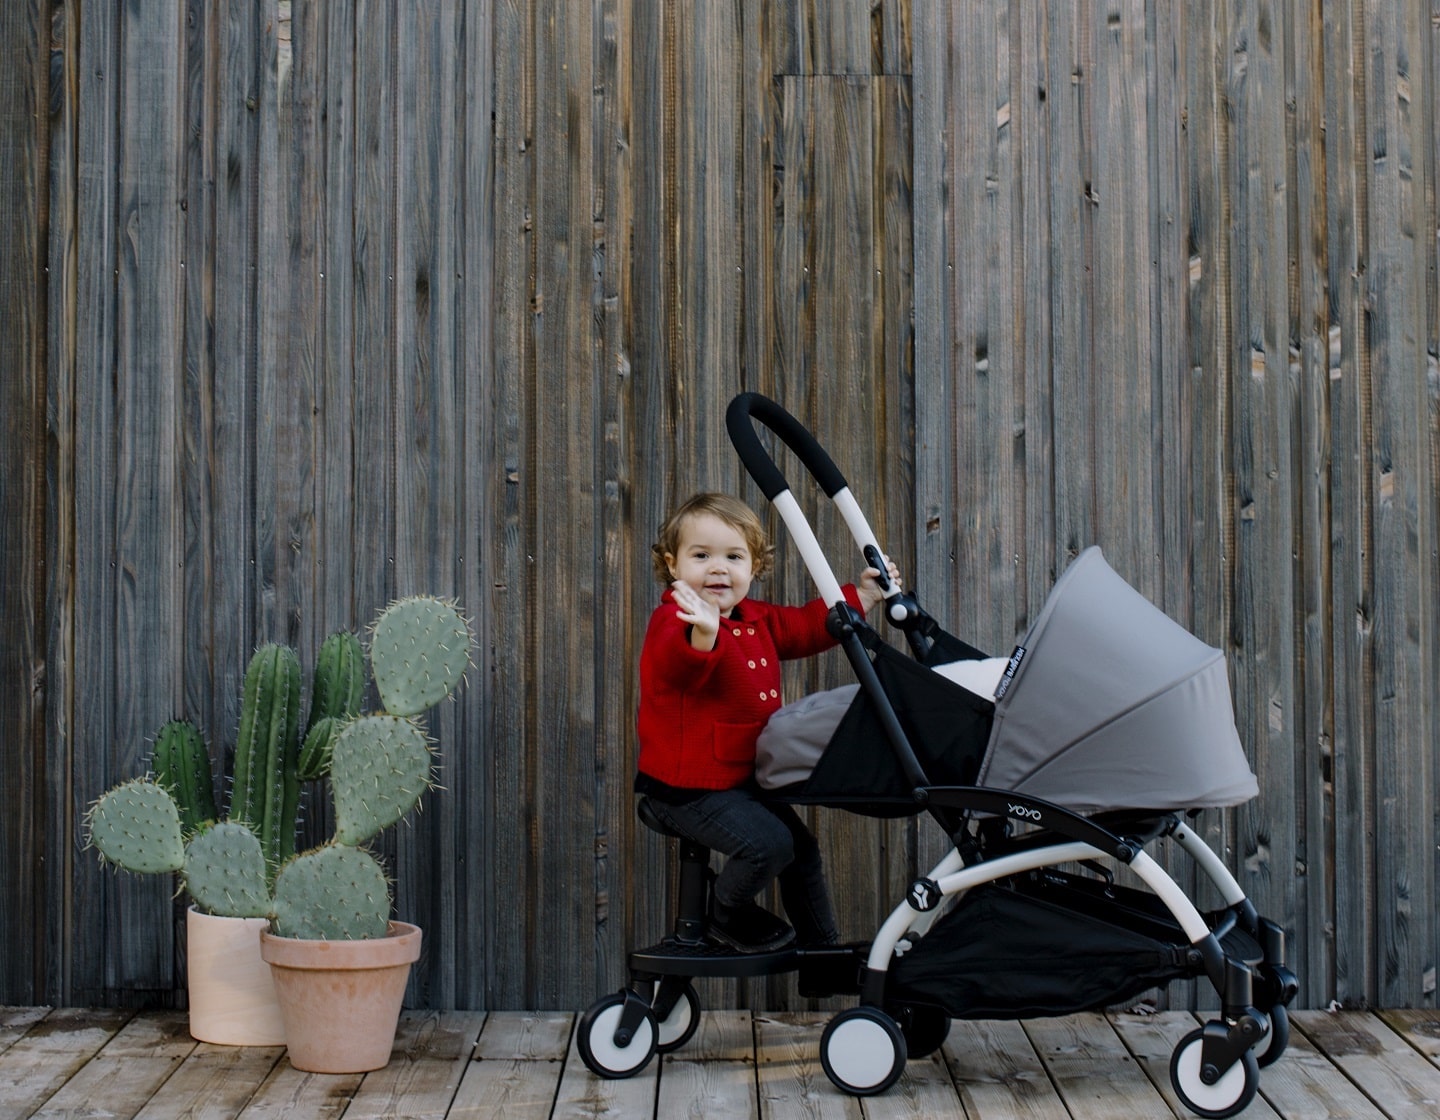 We Take A Closer Look At The BABYZEN YOYO² Baby Stroller